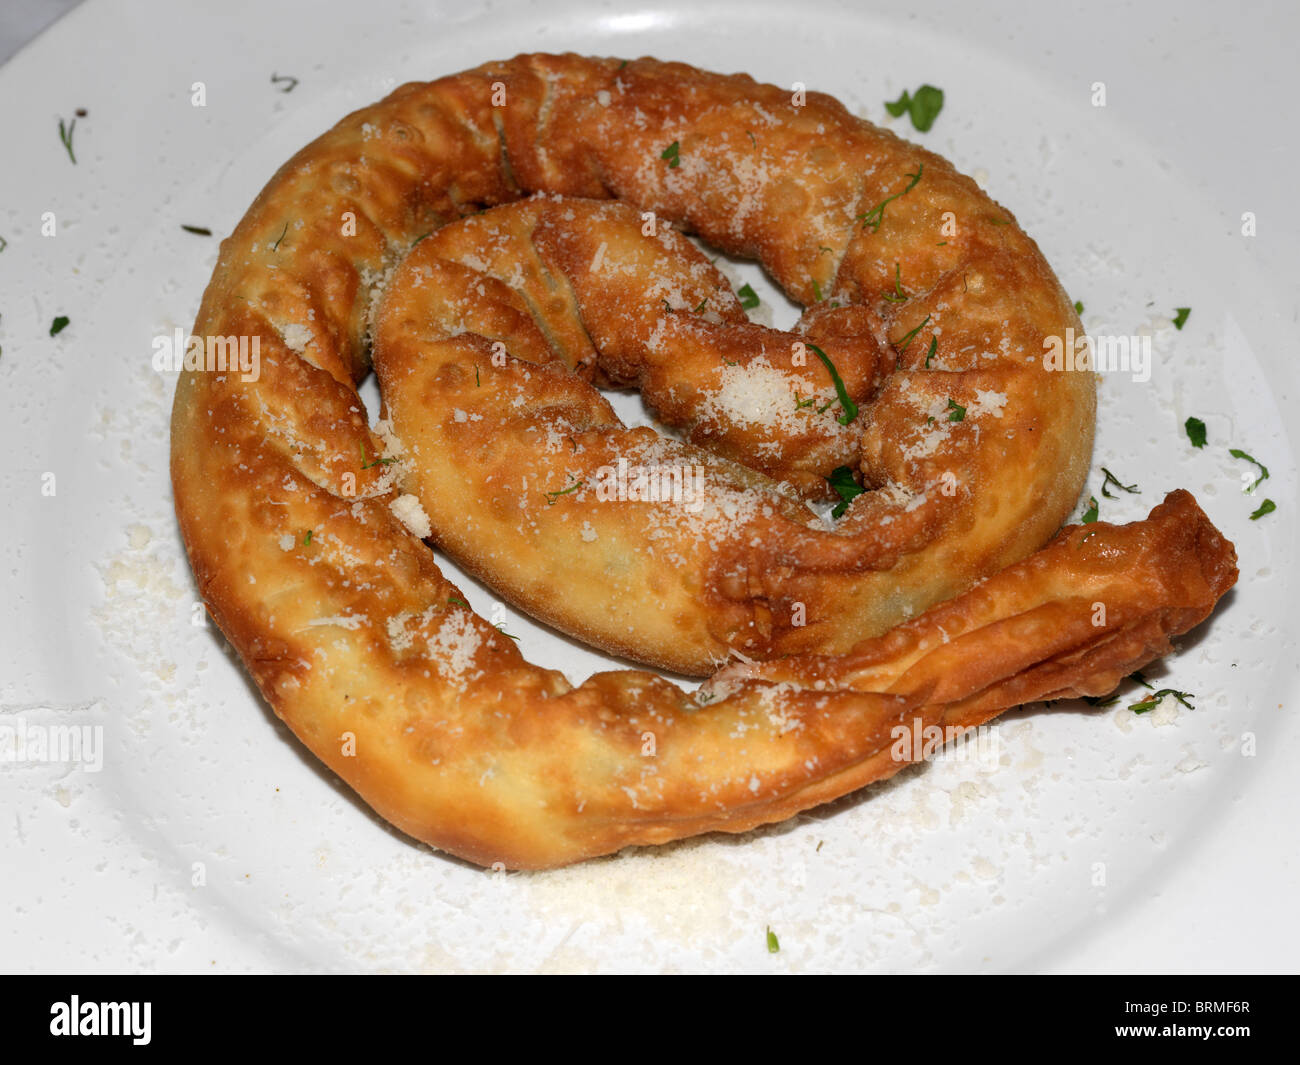 Greece Battered Sausage On A Plate Stock Photo